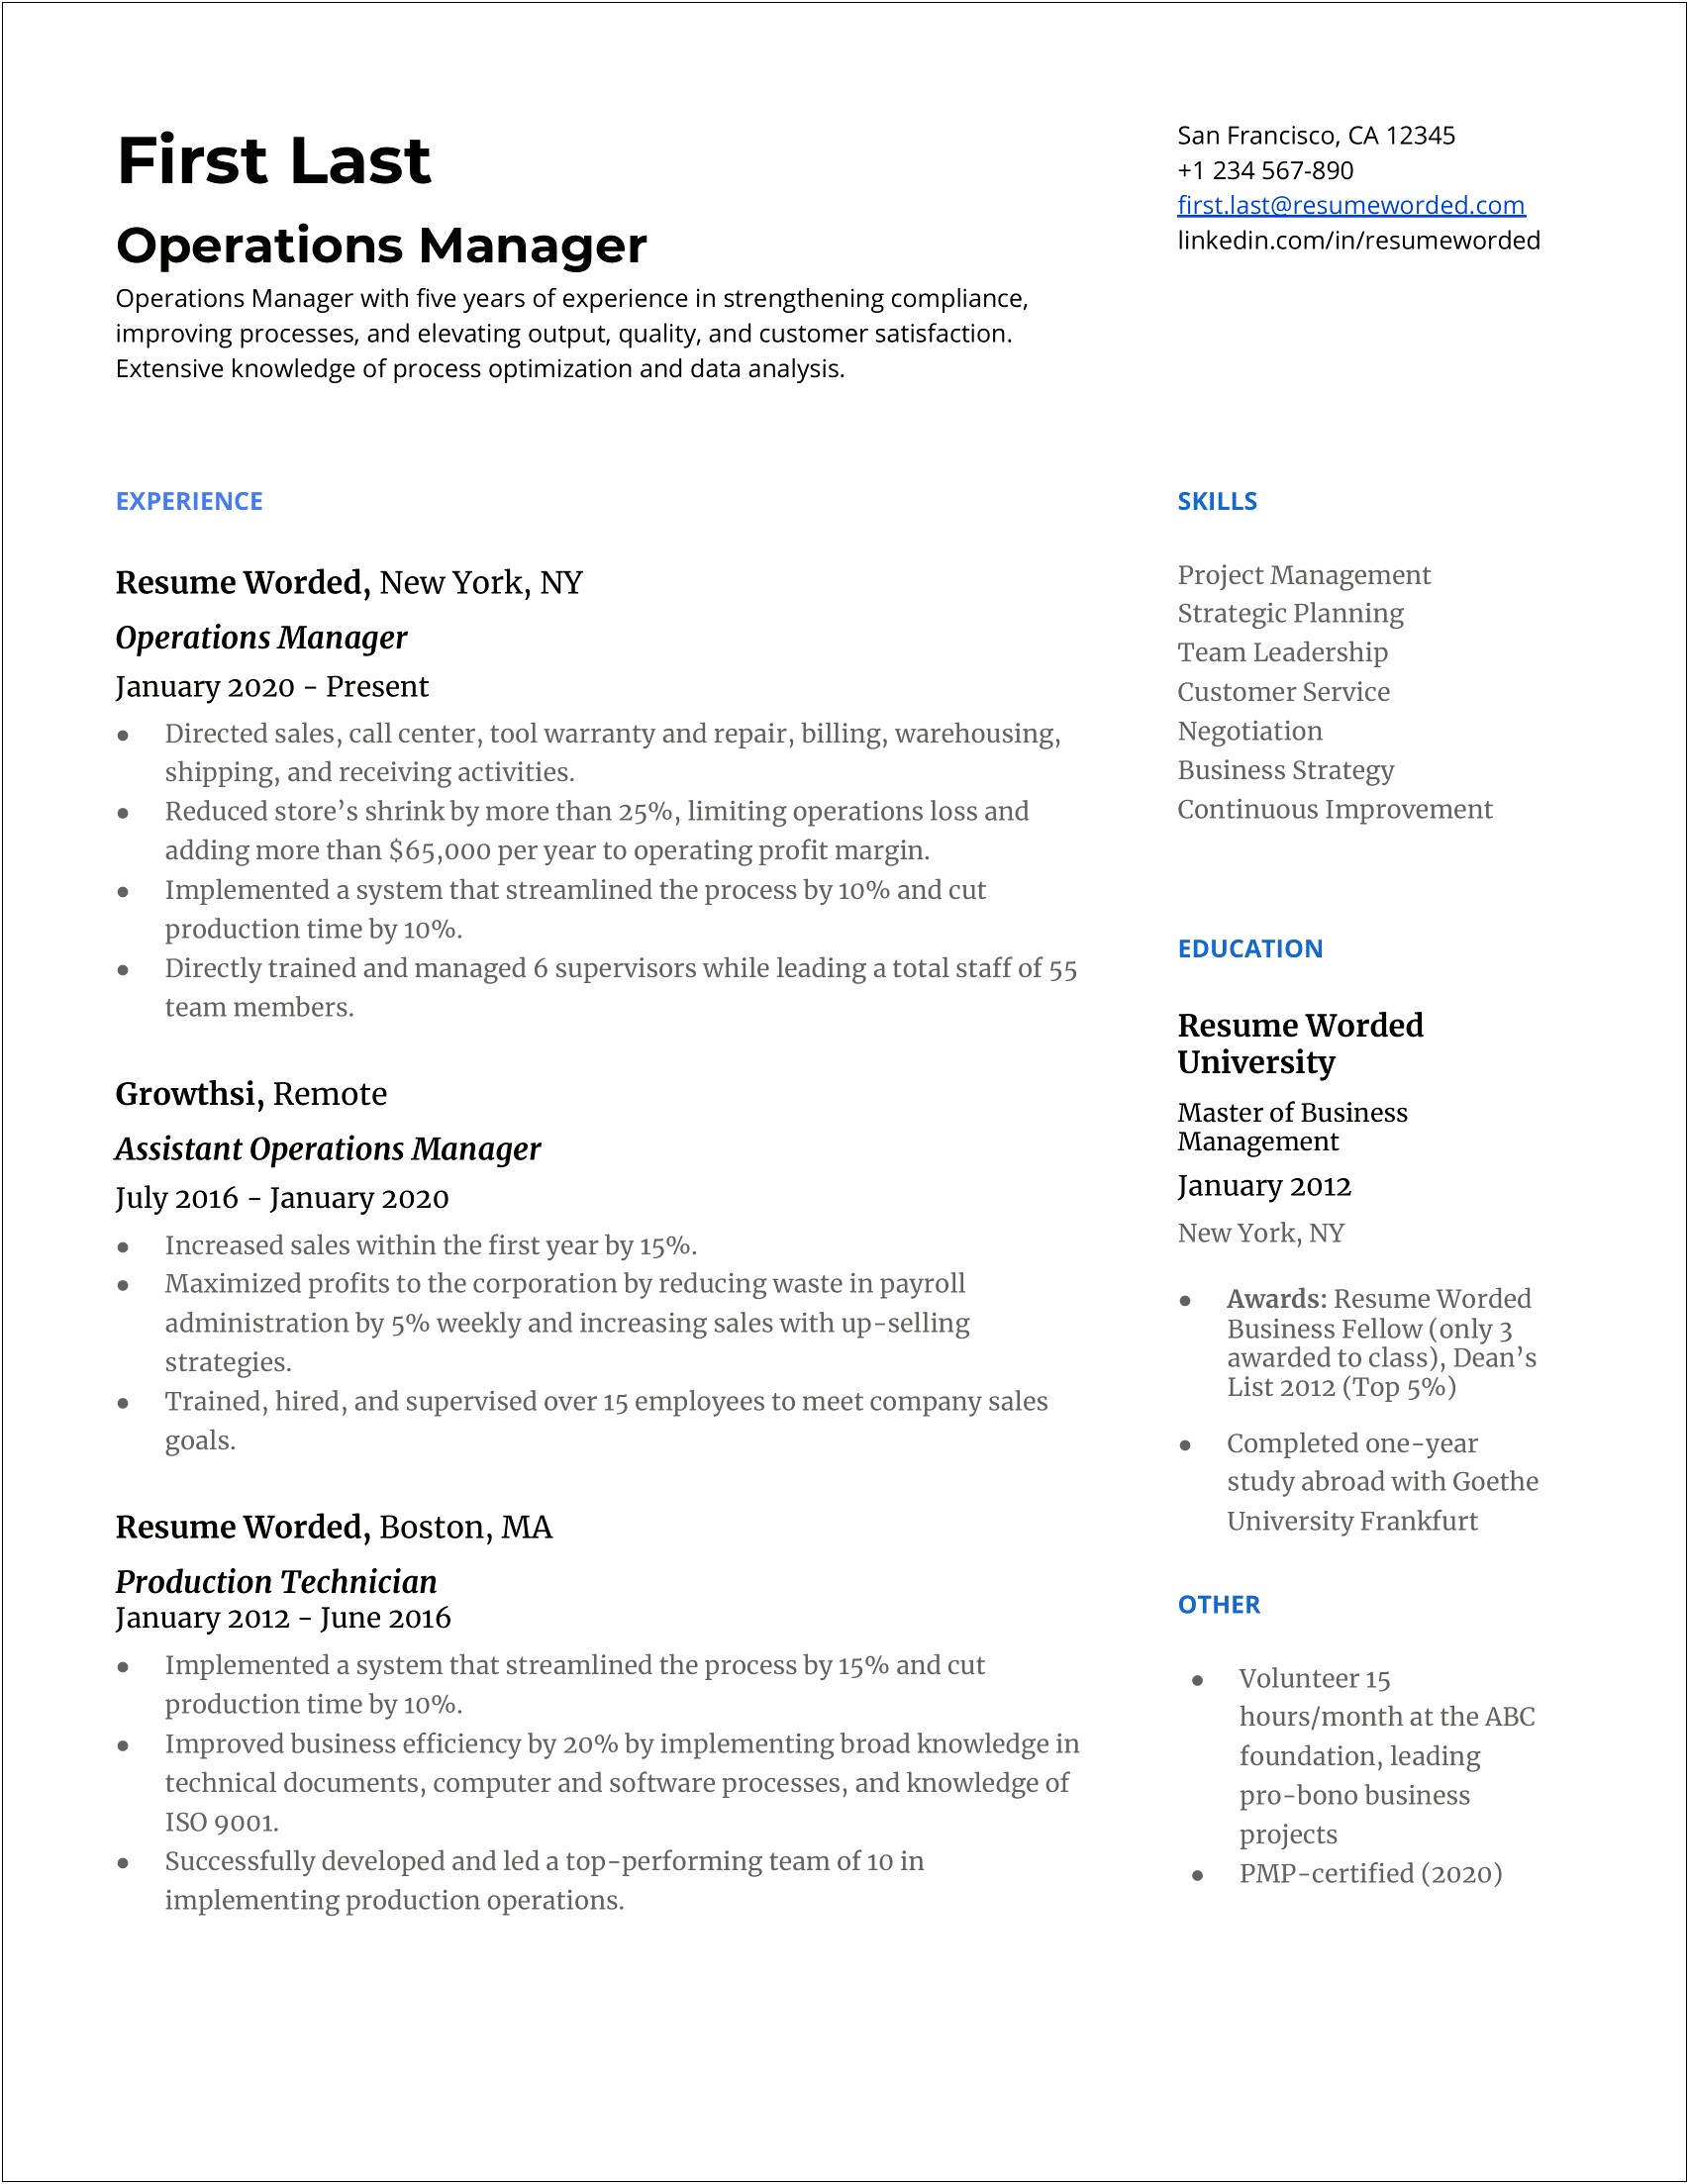 Operations Manager With One Year Experience Sample Resume